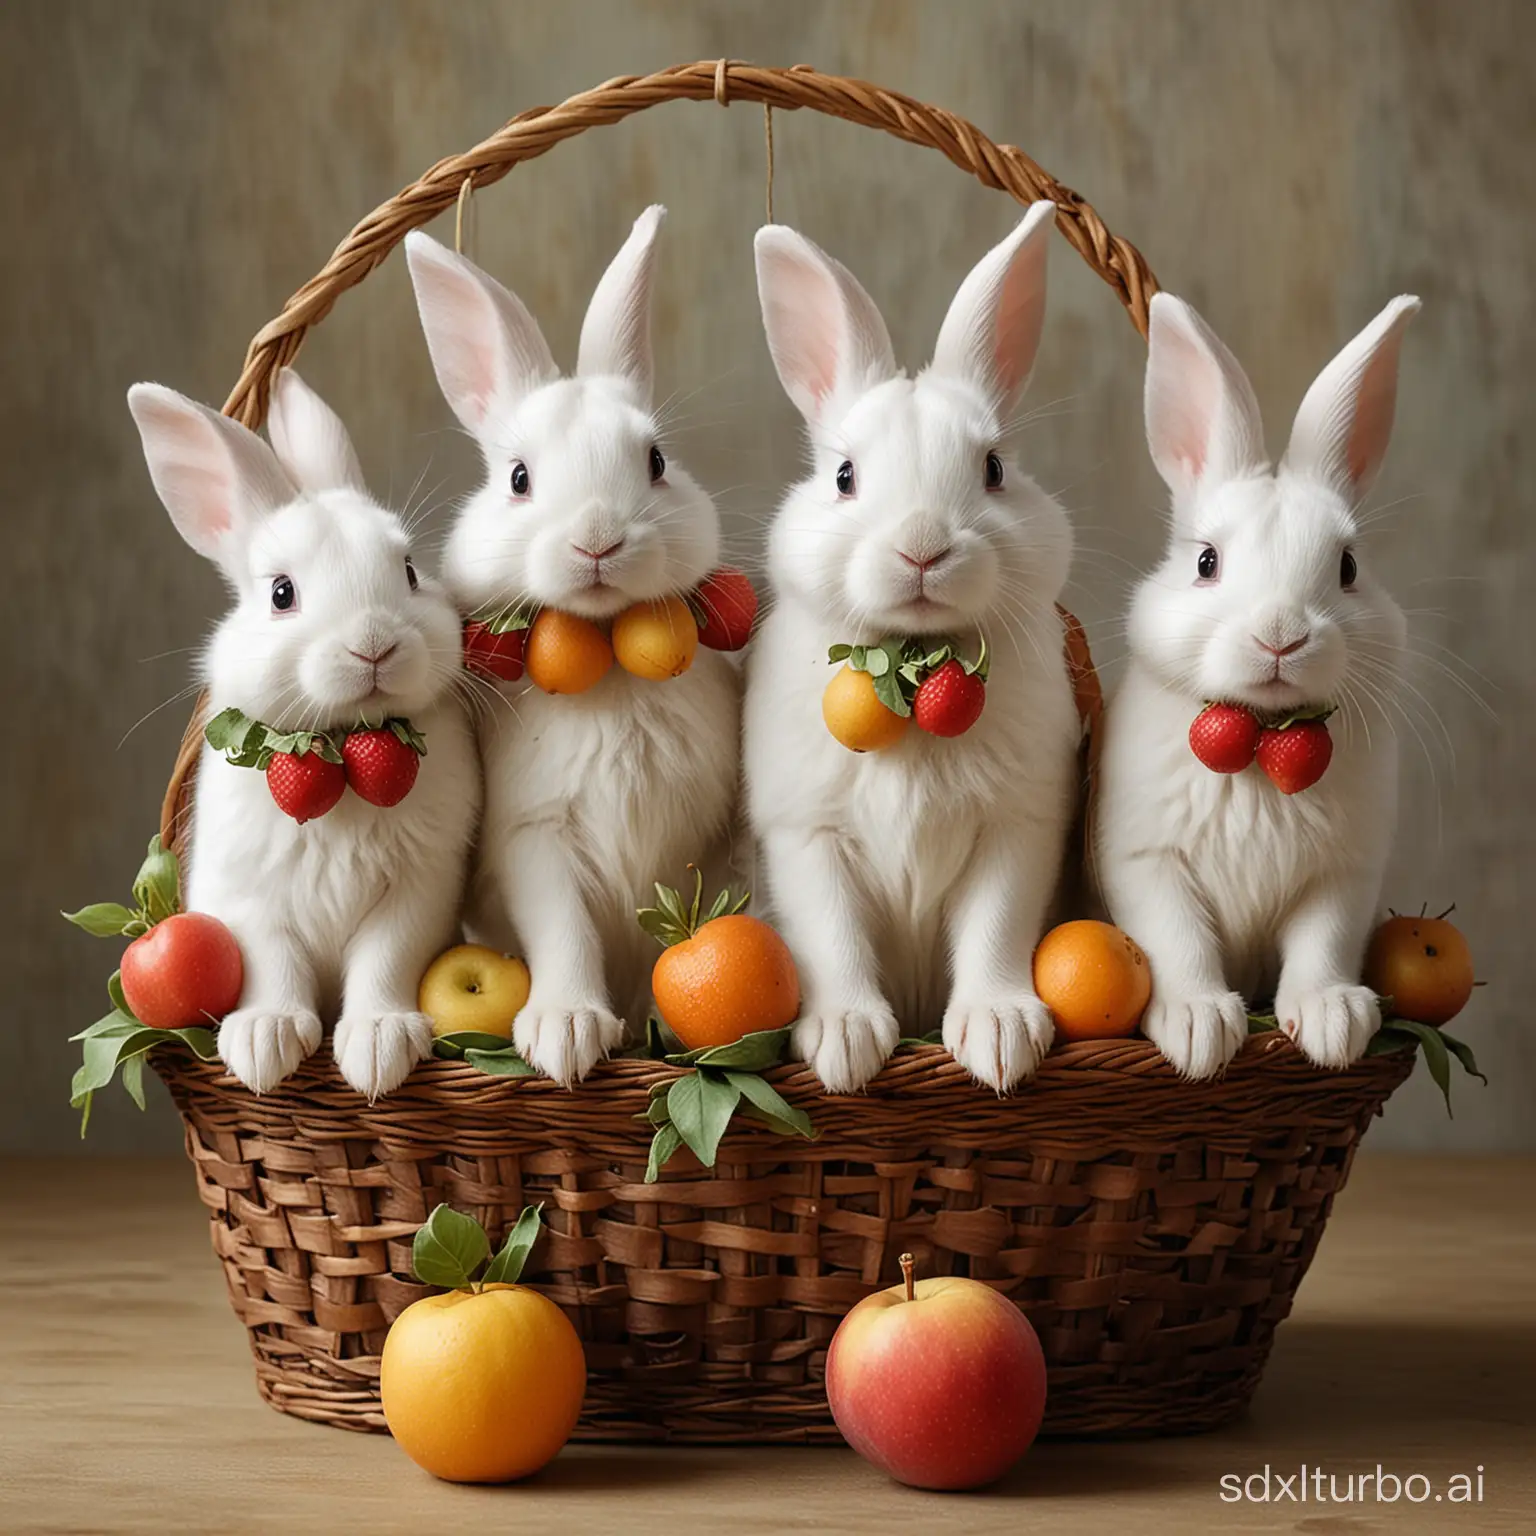 Playful-White-Rabbits-Riding-Spotted-Dog-with-Fruit-Basket